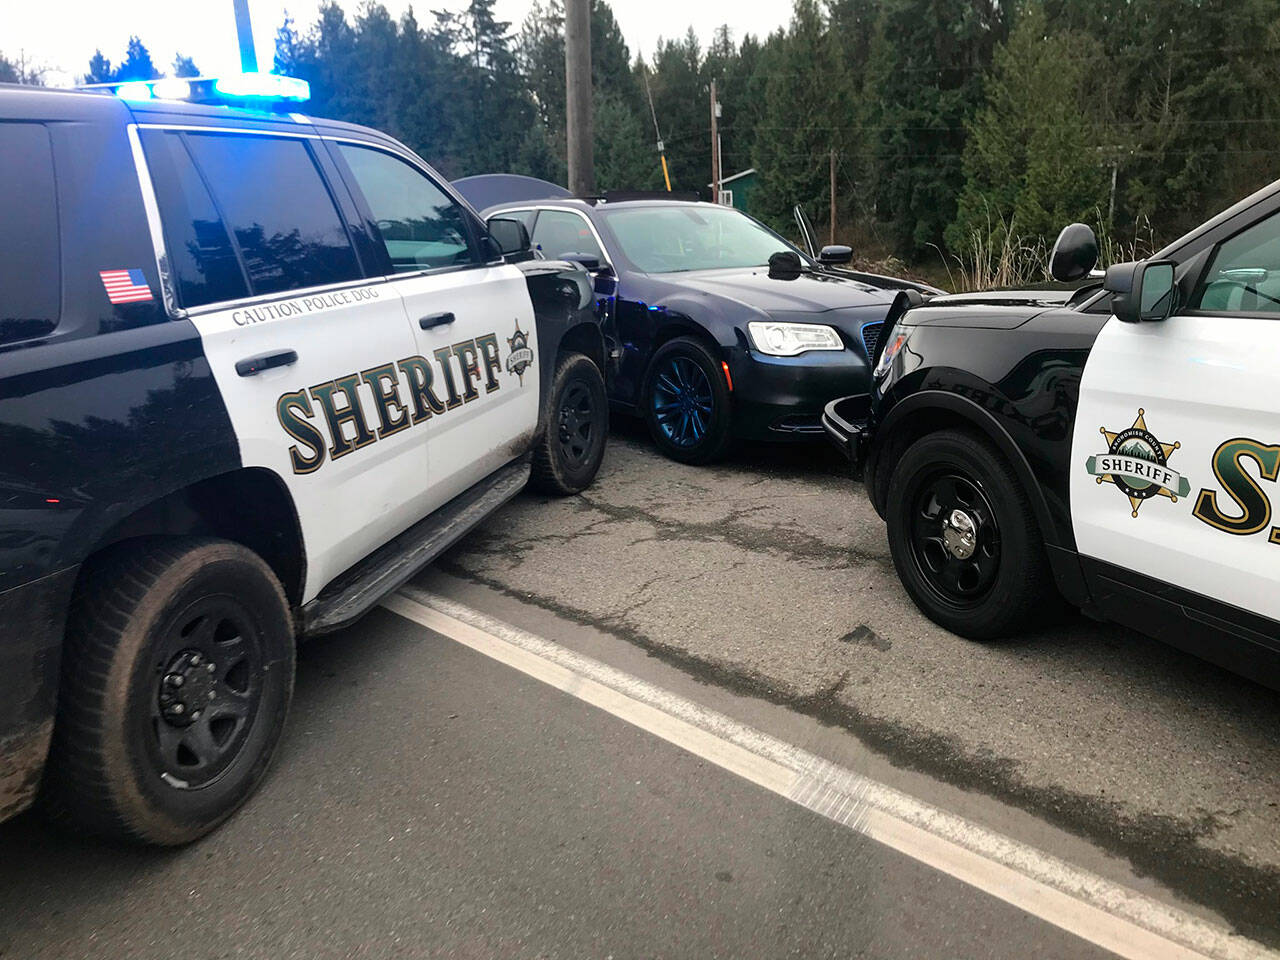 A man led police on a high speed chase through north Snohomish County on Thursday, Dec. 10, 2020. (Snohomish County Sheriff’s Office)